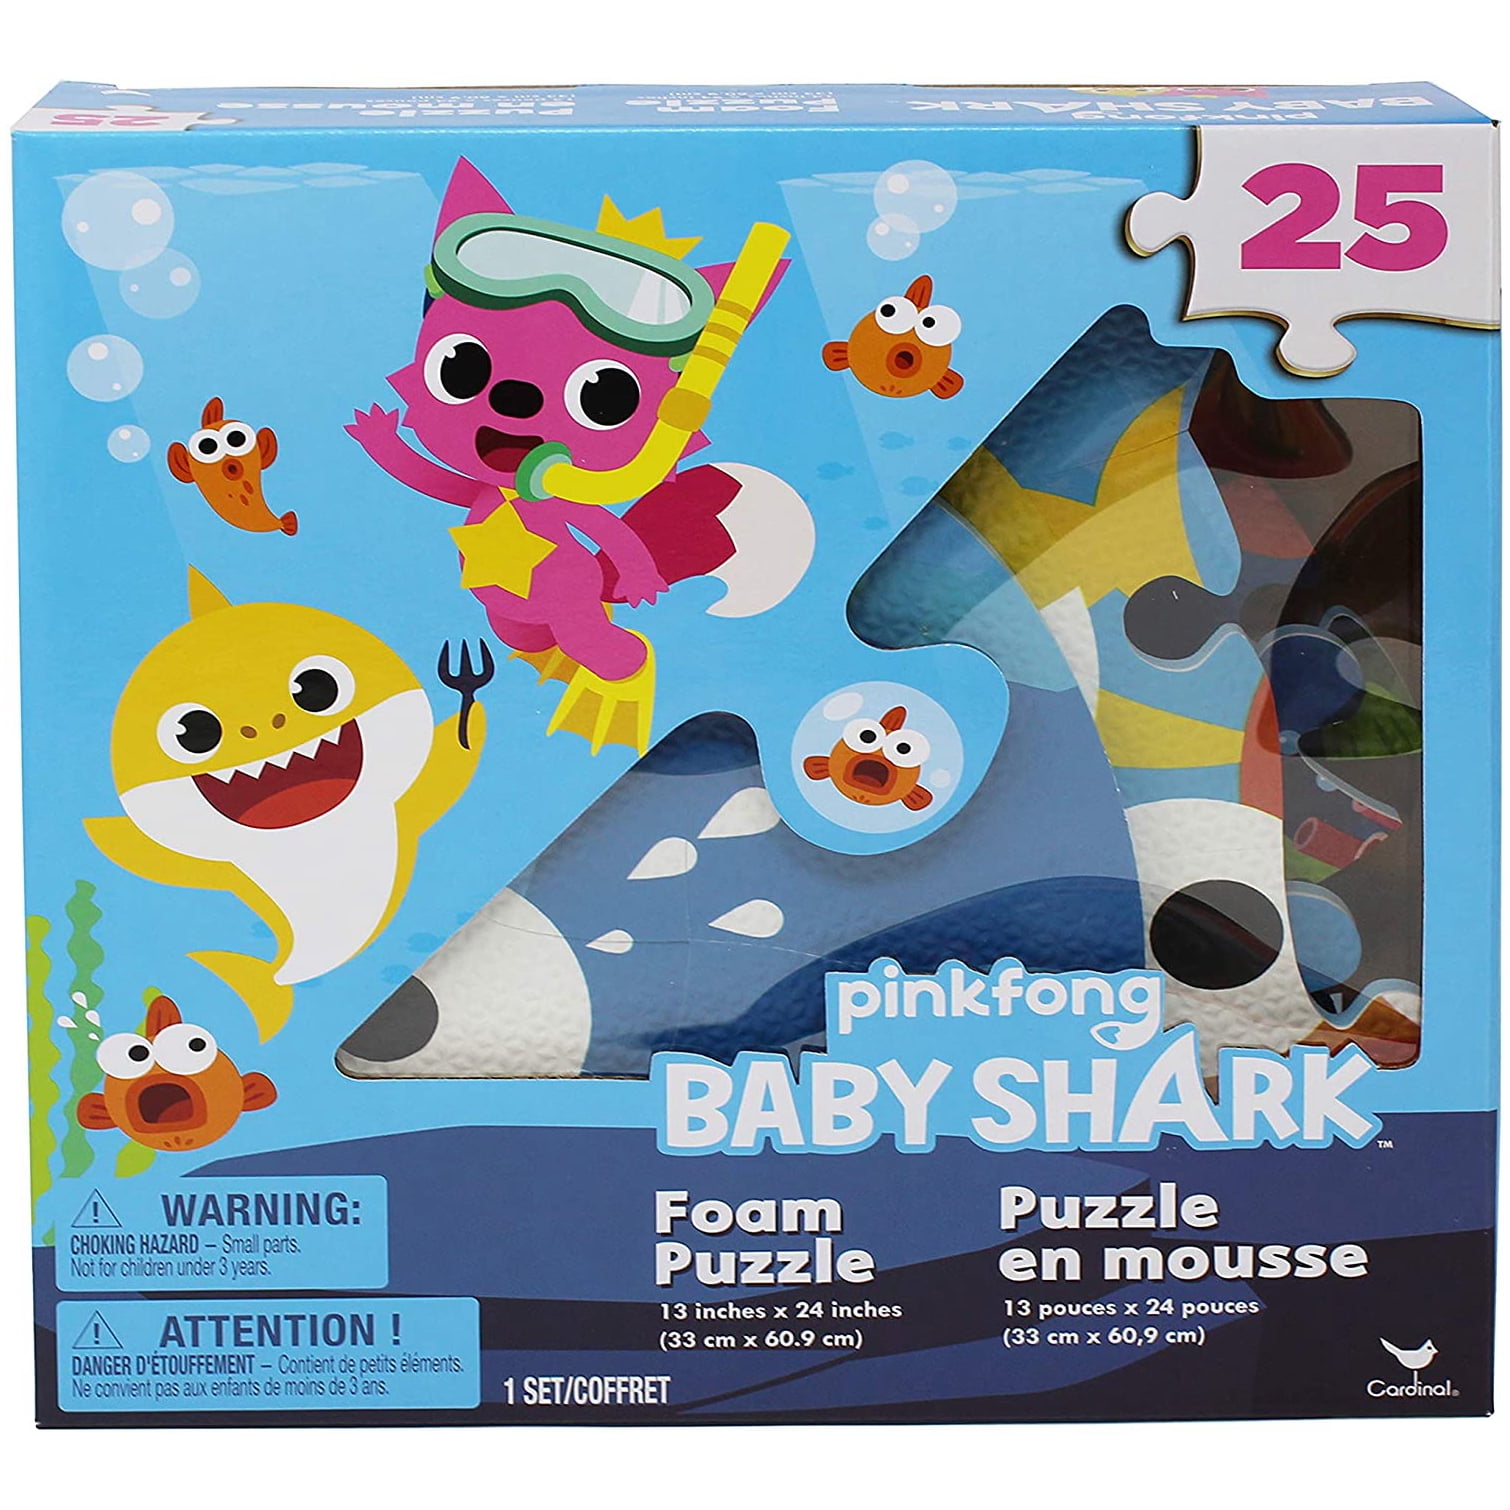 Pinkfong Jigsaw Puzzle Bag Set For Kids Child 